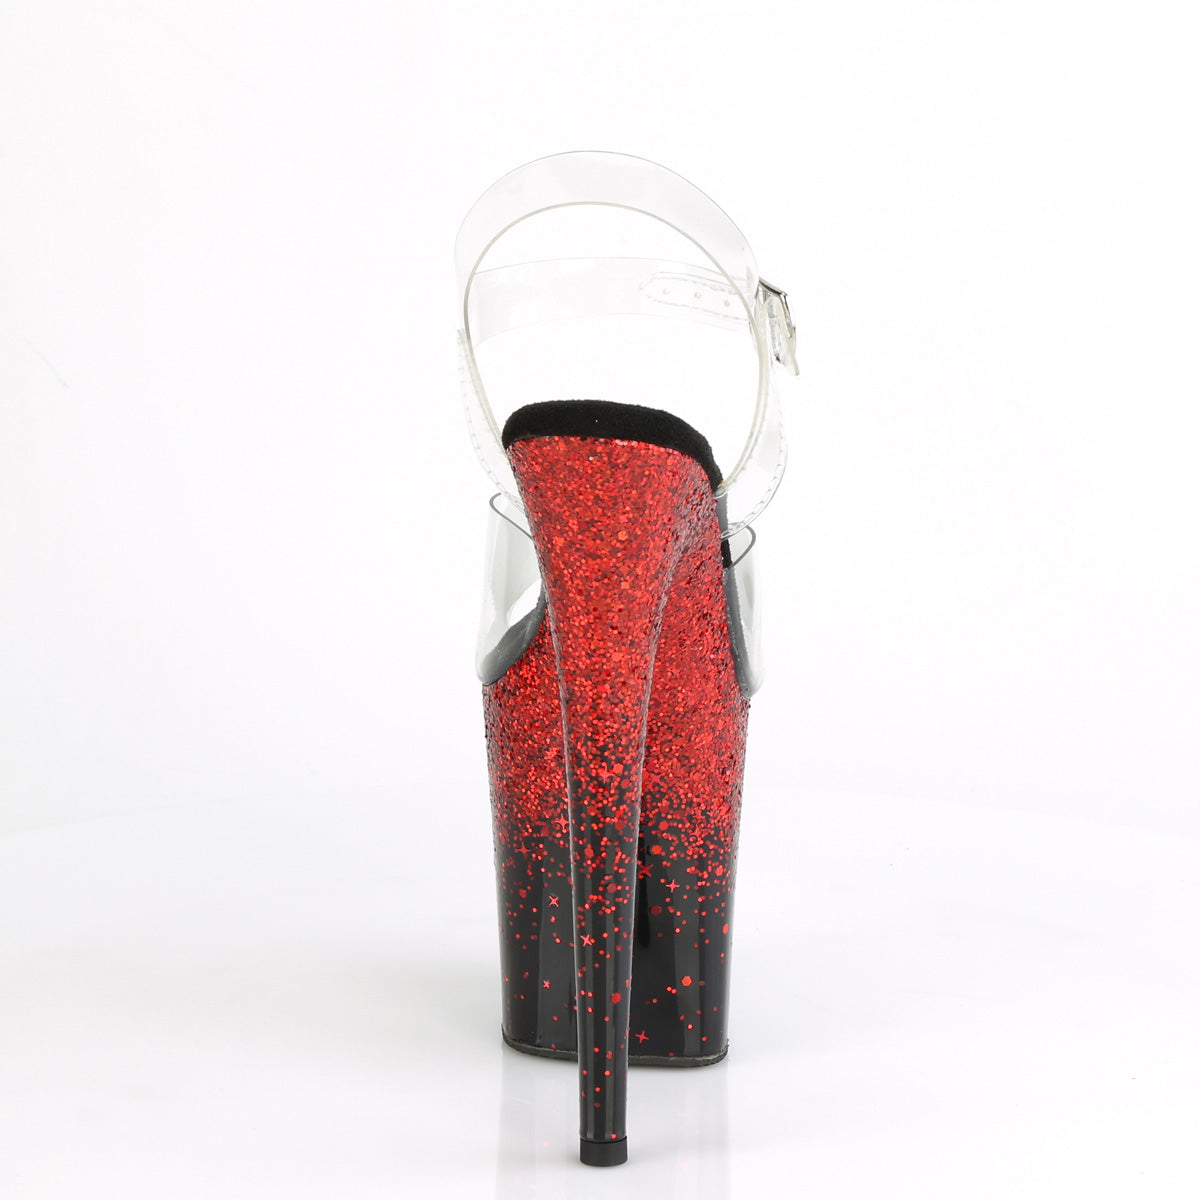 FLAMINGO-808SS Pleaser Pole Dancing Shoes 8 Inch Heel Pleasers - Sexy Shoes Fetish Footwear